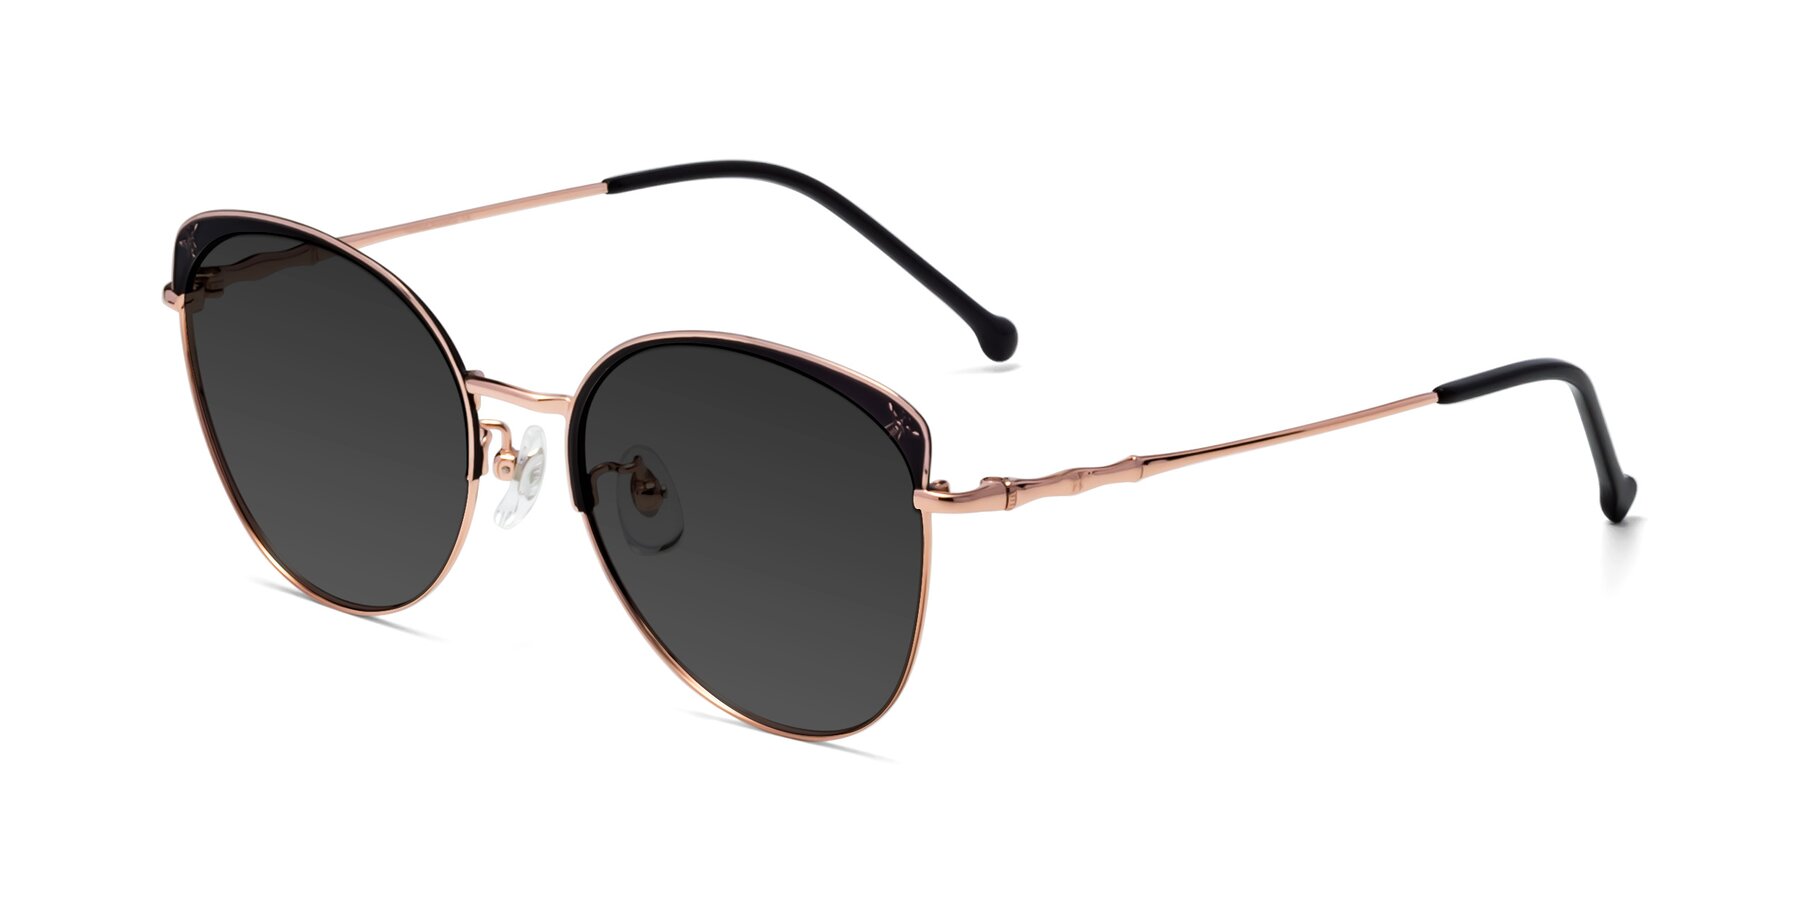 Angle of 18019 in Black-Rose Gold with Gray Tinted Lenses